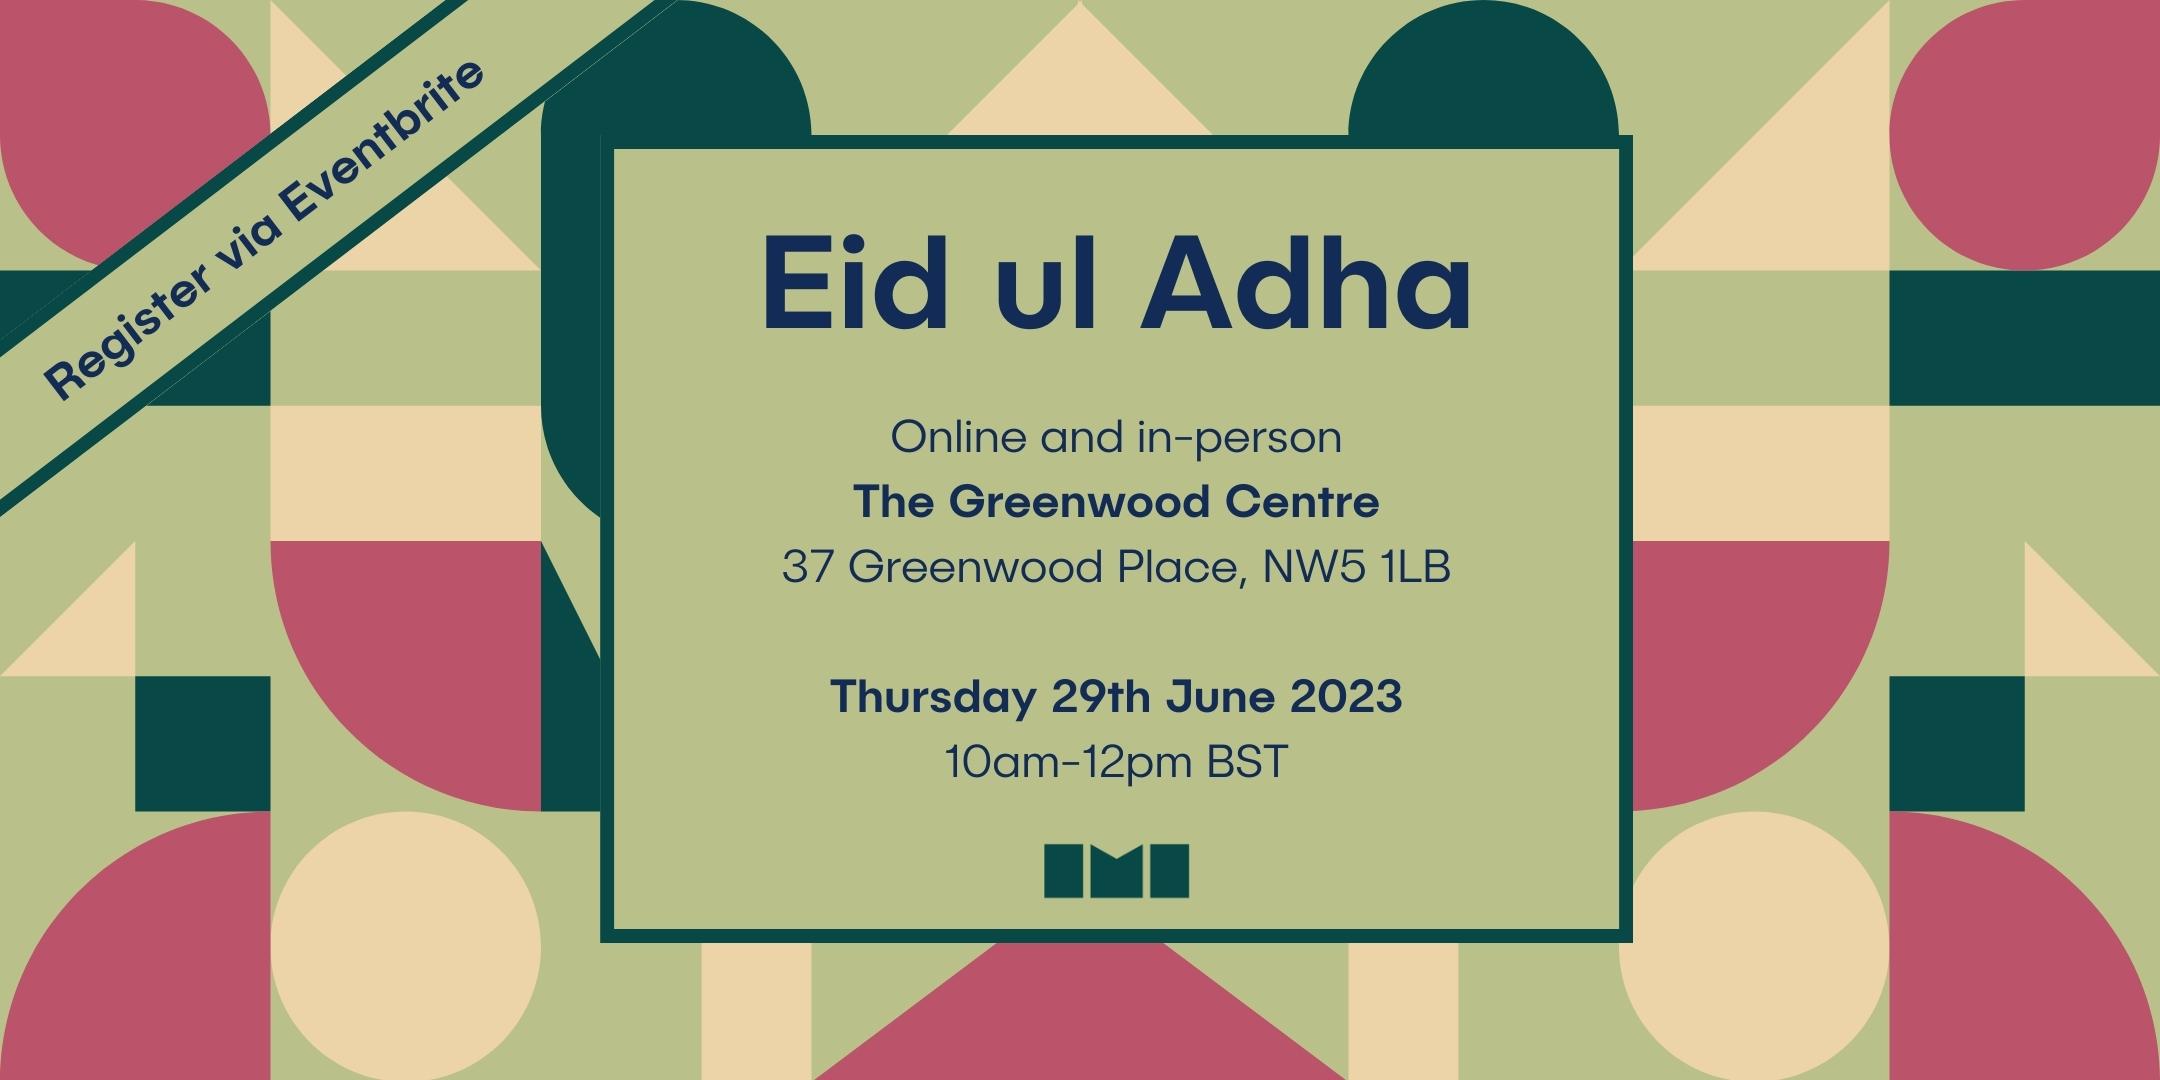 A multicoloured geometric graphic on a green background with text in a box in the centre. The text reads, "Eid ul Adha. Online and in person. The Greenwood Centre, 37 Greenwood Place, NW5 1LB. Thursday 29th June 2023. 10am to 12pm BST."